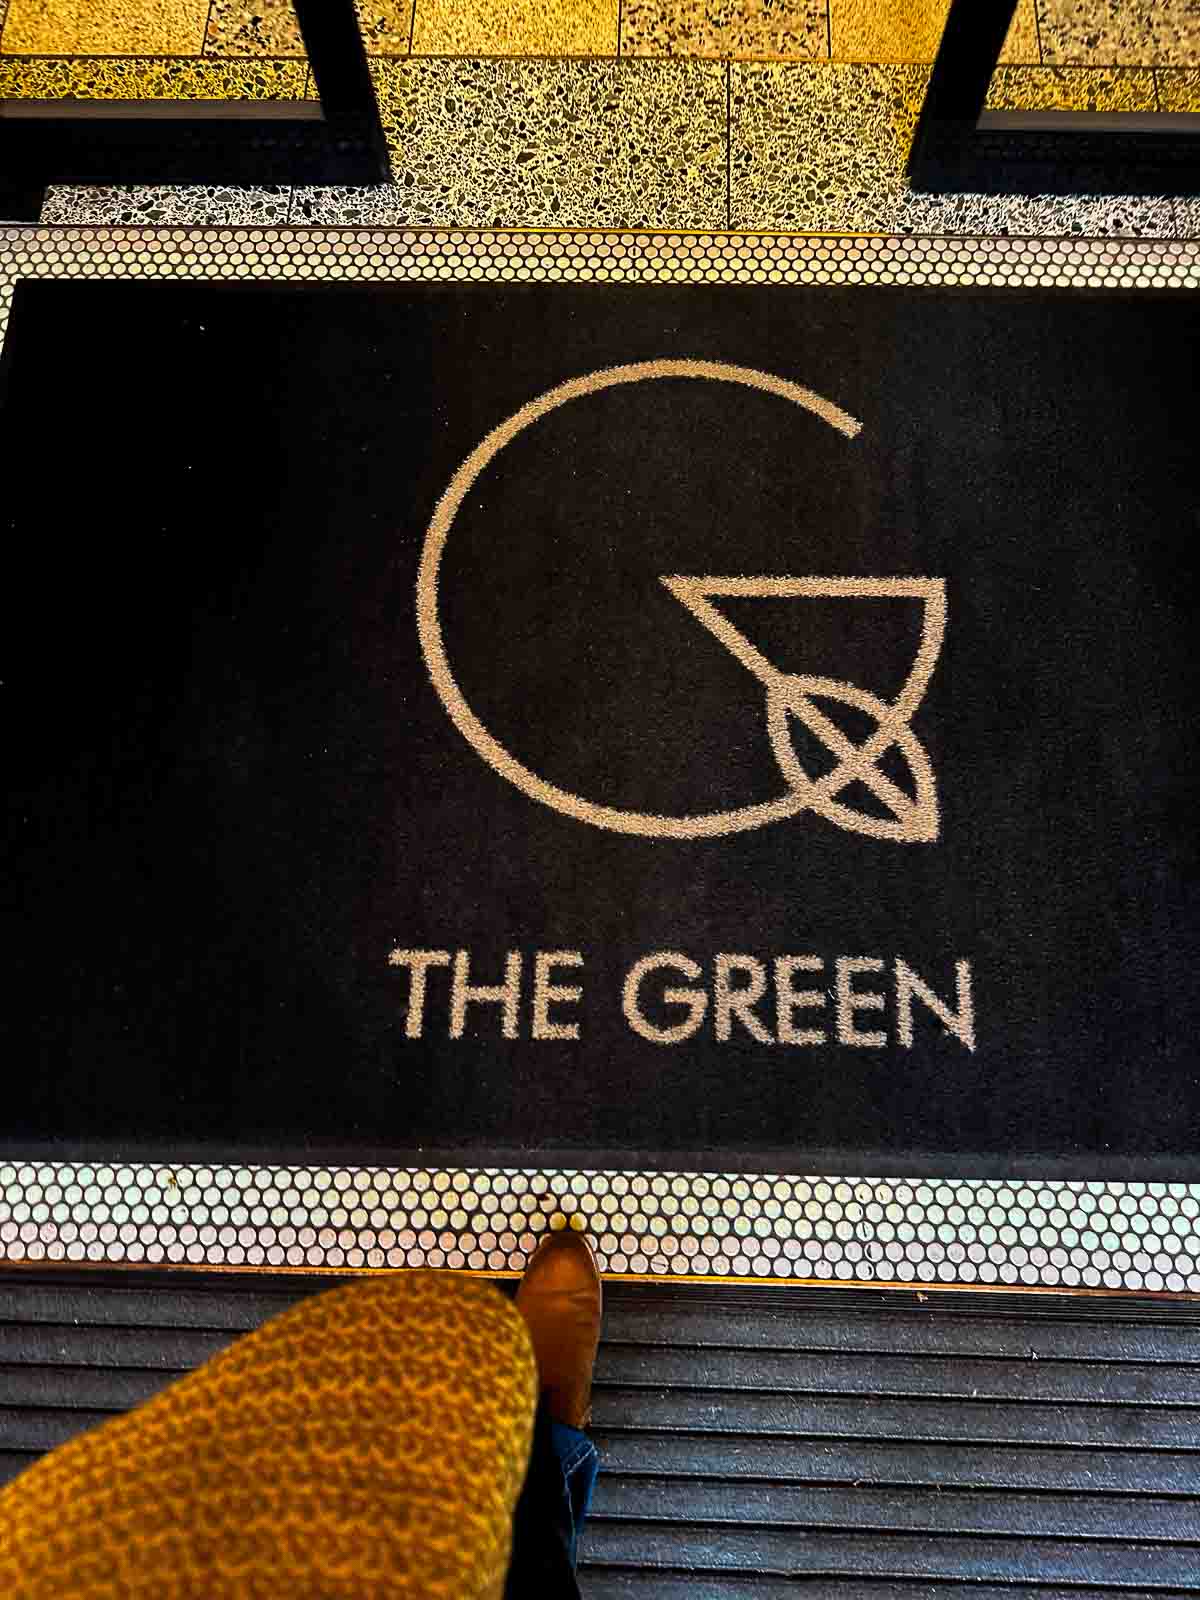 Best Place to Stay in Dublin - The Green Hotel